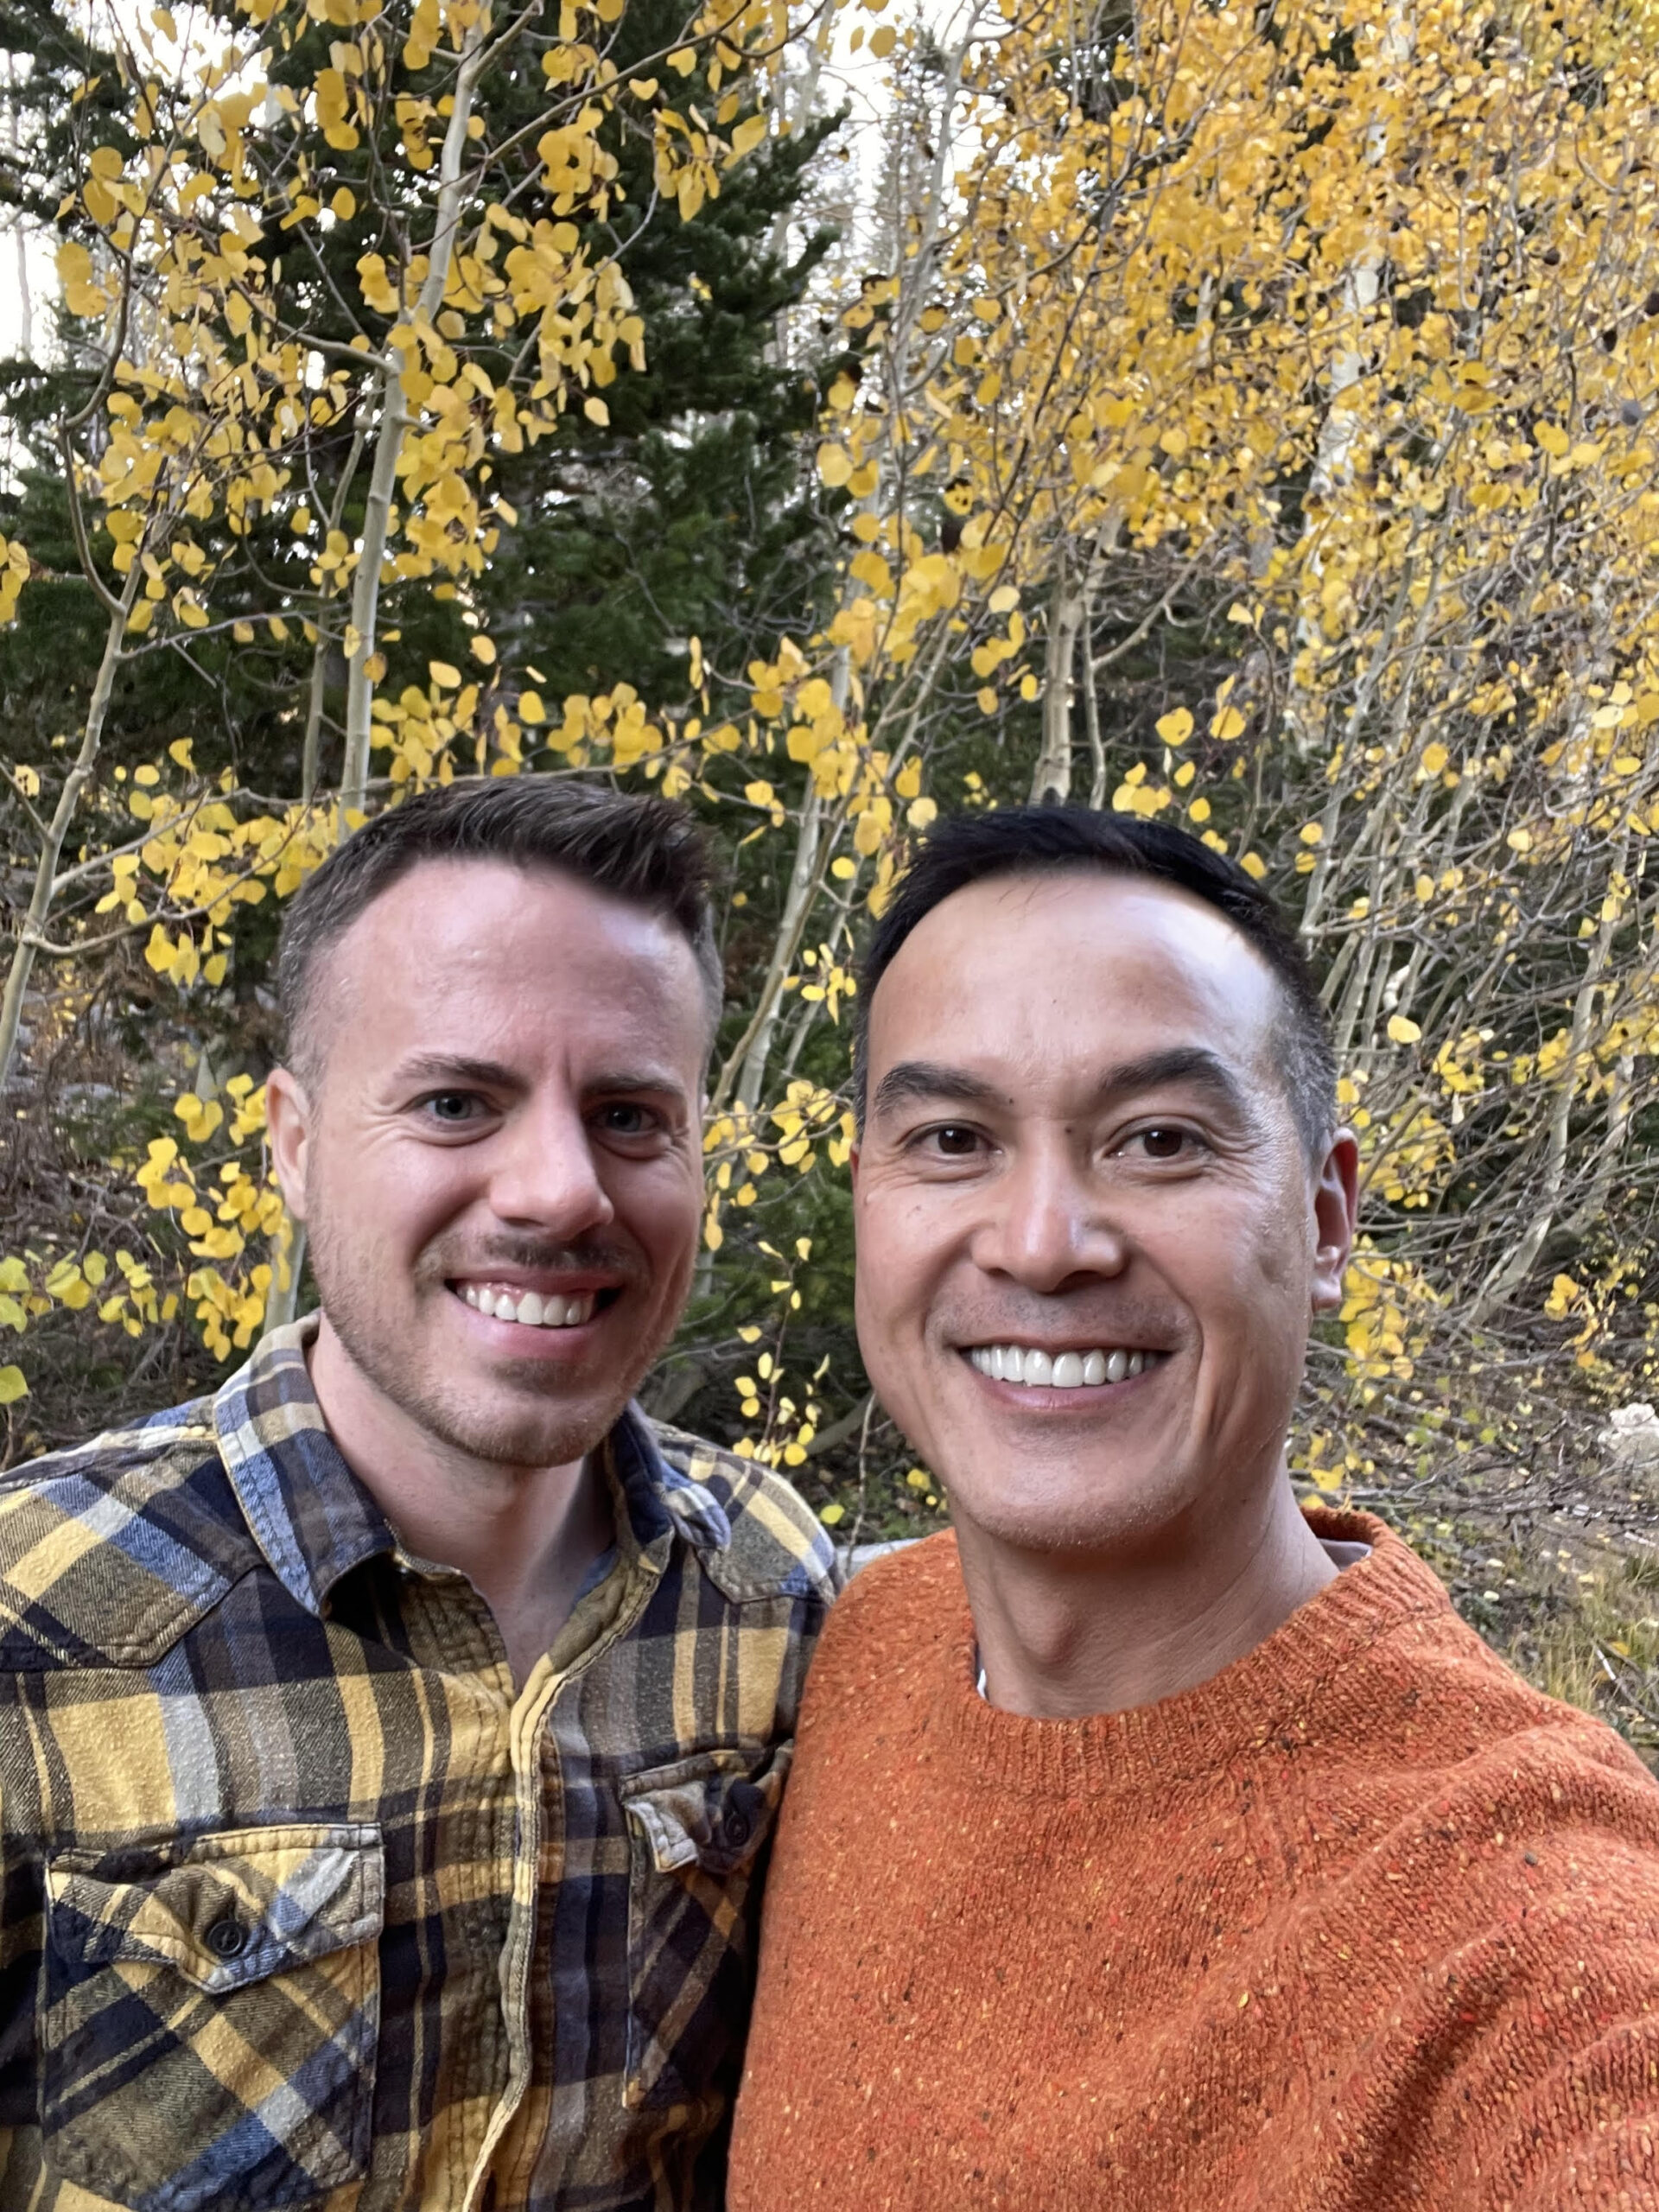 The couple visiting the canyon during the fall season and color change. A field of yellow aspens and pines in the background.